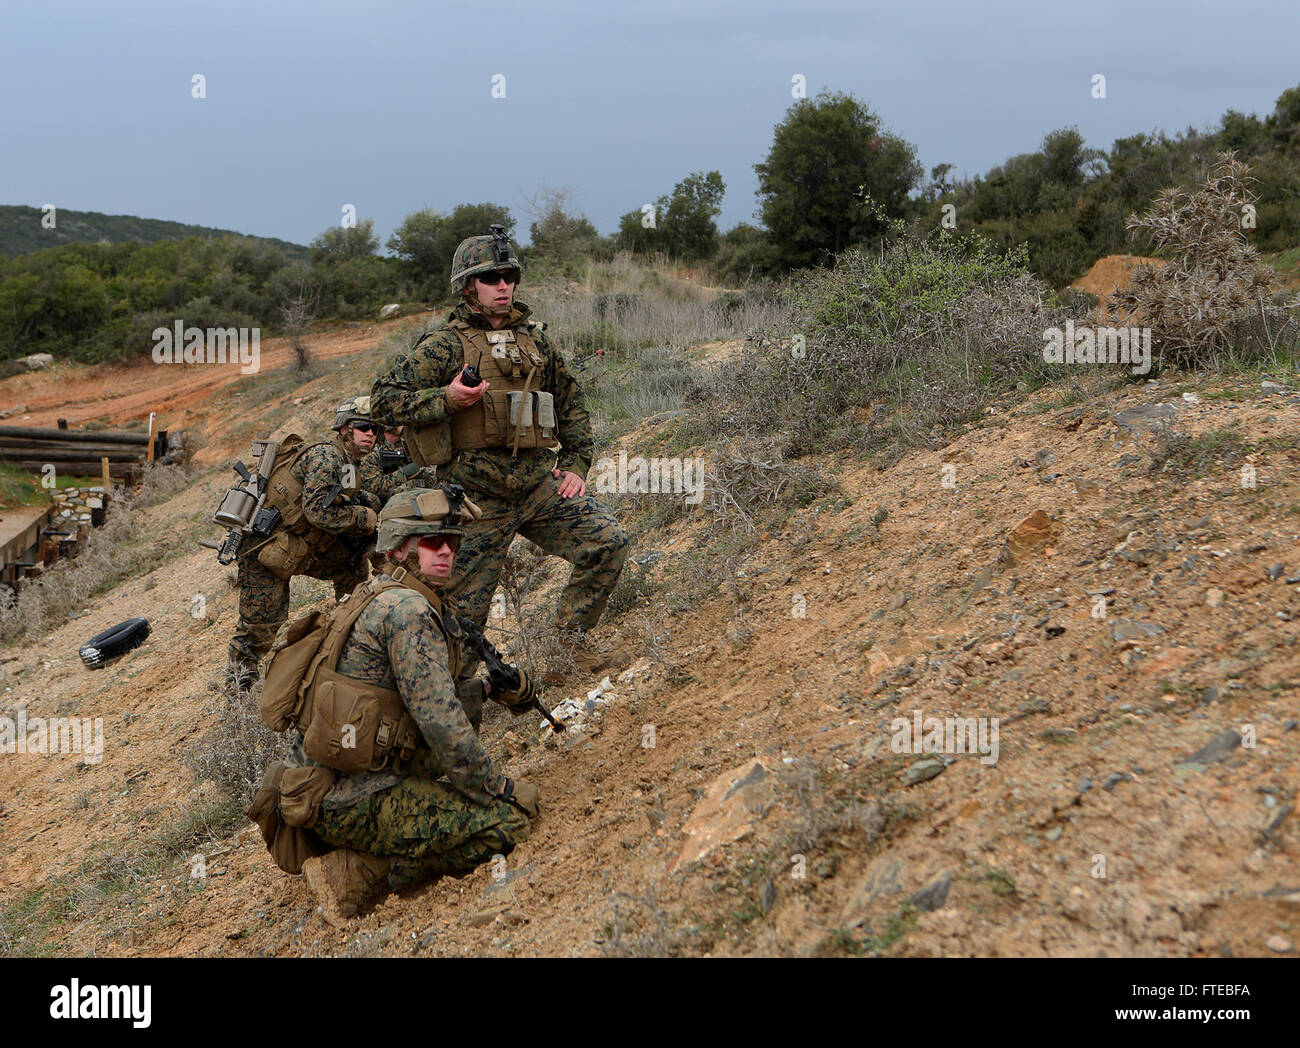 140309-M-WB921-486 GREECE (March 9, 2014) - U.S. Marines with Battalion Landing Team 1st Battalion, 6th Marine Regiment, 22nd Marine Expeditionary Unit (MEU), assault a hill during a bilateral training exercise with the Hellenic Army. The U.S. and Greece regularly conduct scheduled military exercises to strengthen professional and personal relationships. The MEU is deployed to the U.S. 6th Fleet area of operations with the Bataan Amphibious Ready Group as a sea-based, expeditionary crisis response force capable of conducting amphibious missions across the full range of military operations. (U. Stock Photo